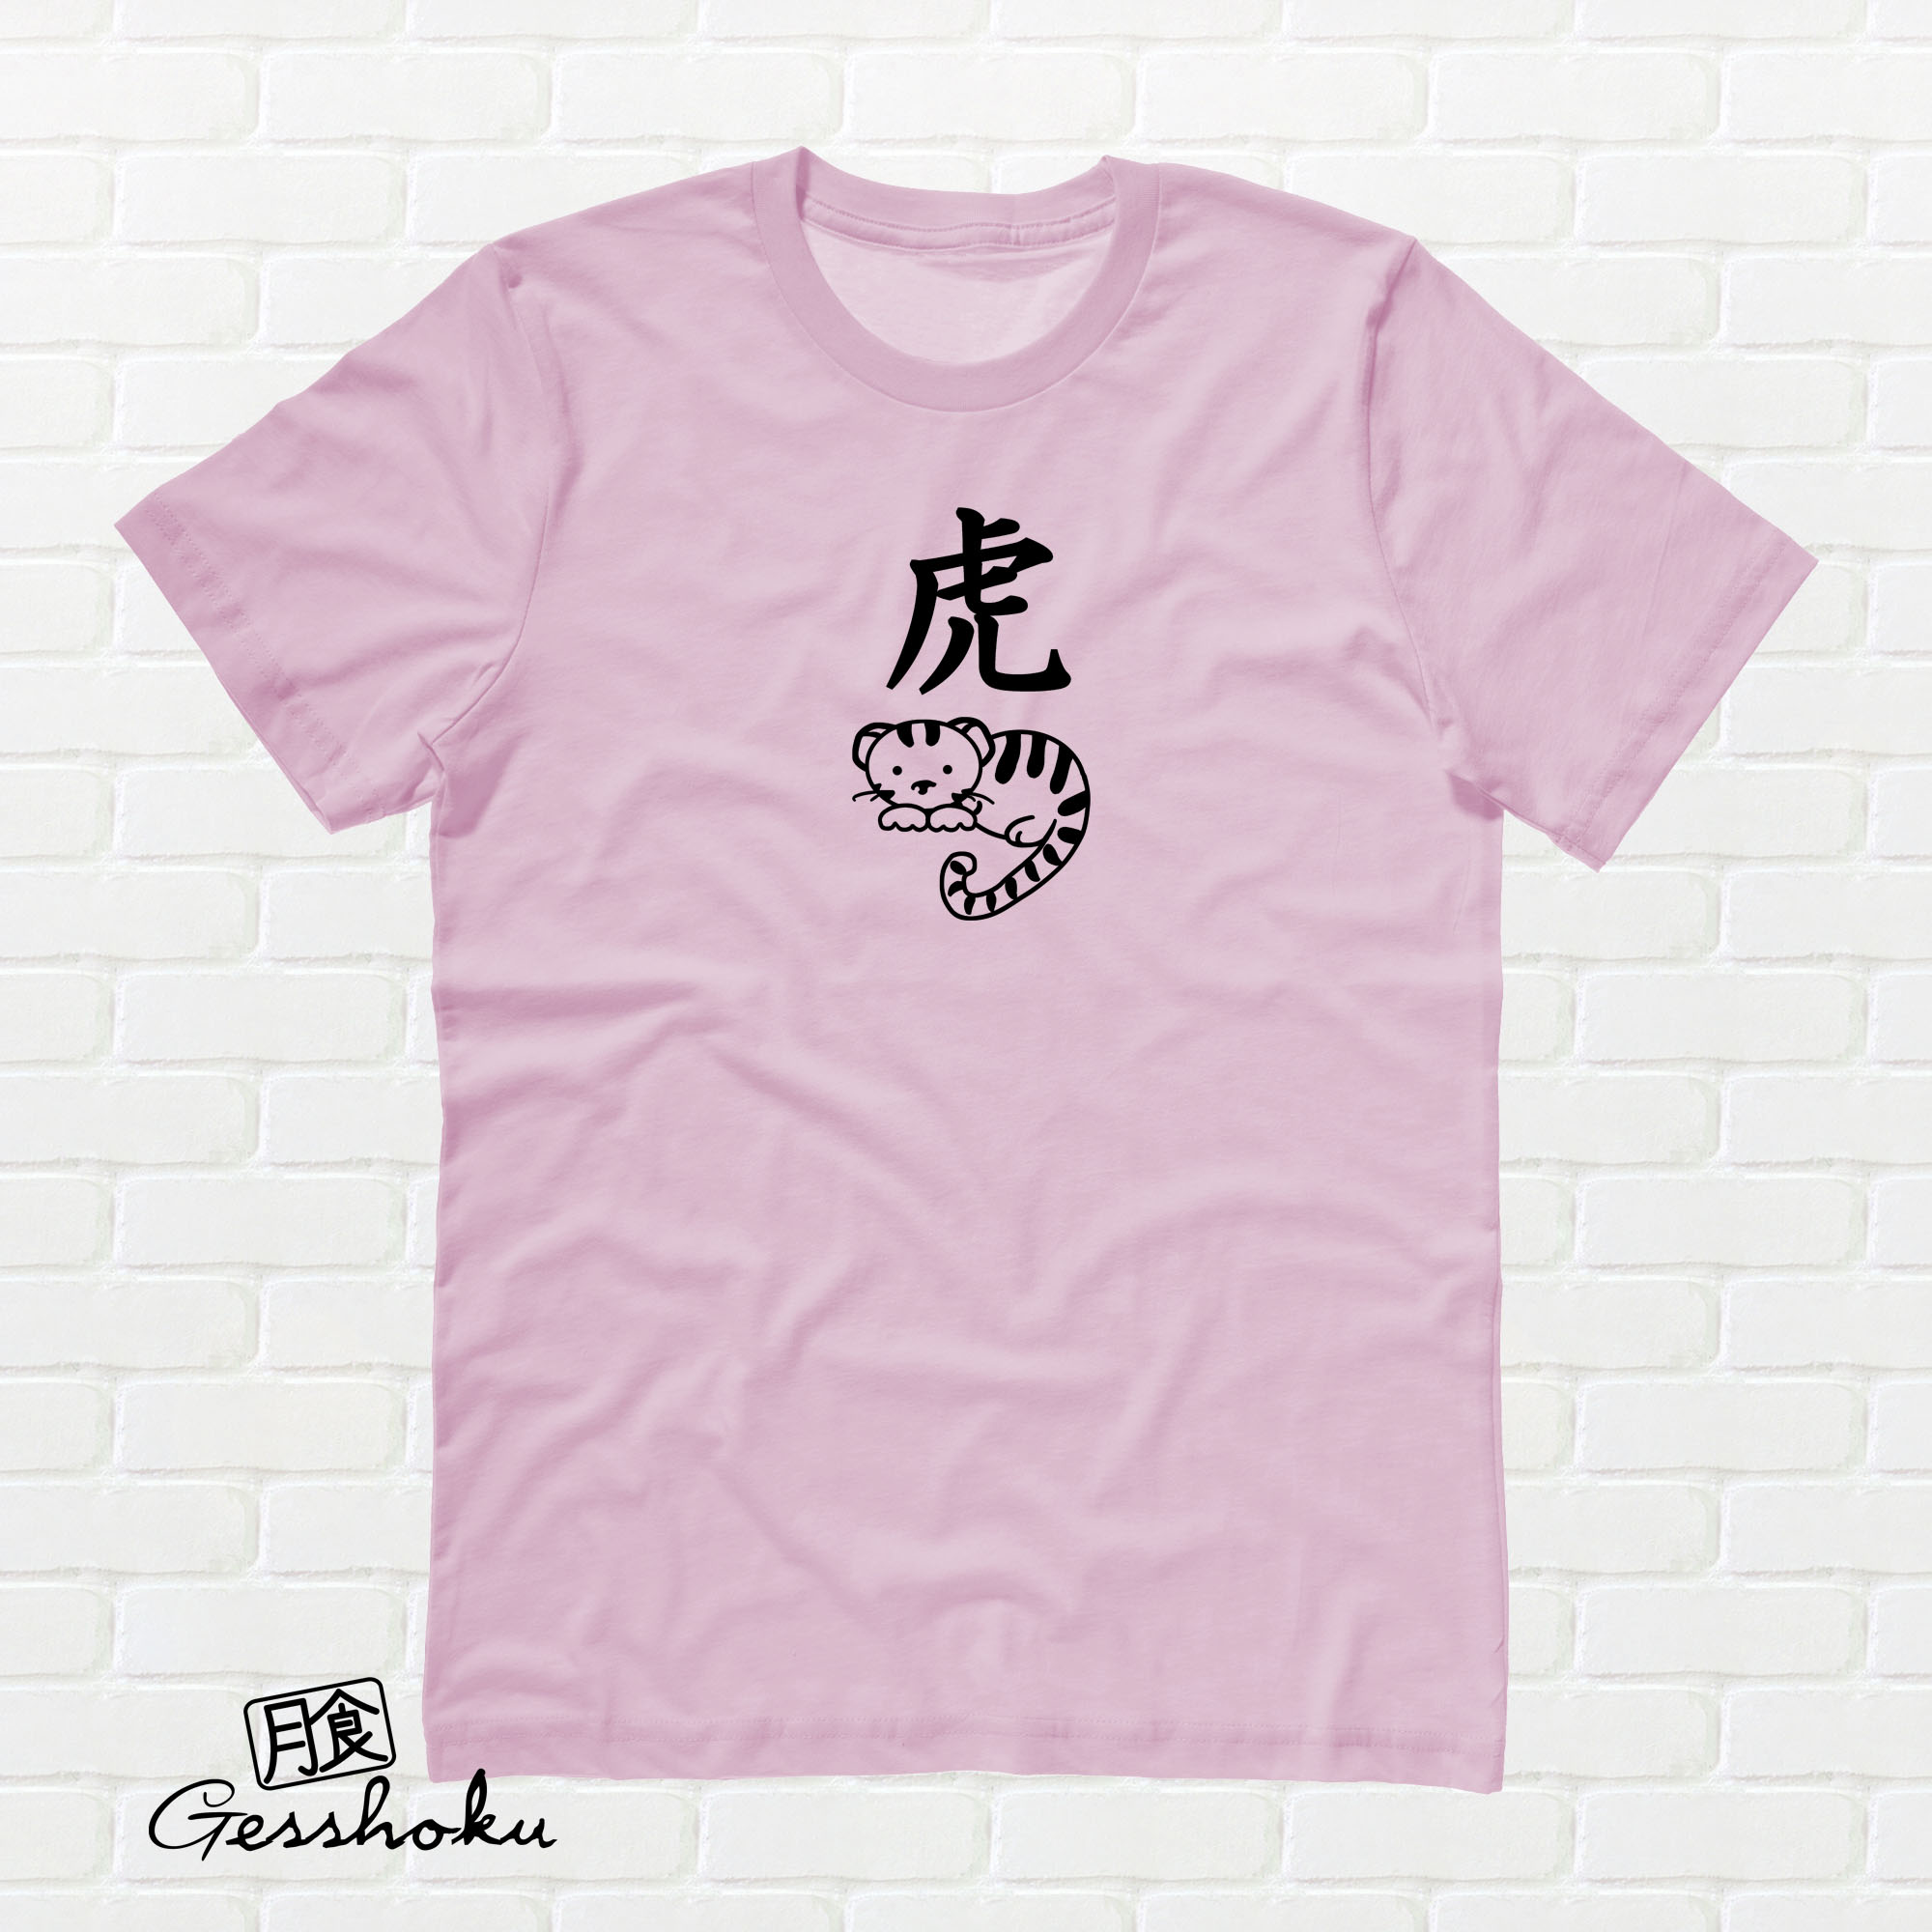 Year of the Tiger Chinese Zodiac T-shirt - Light Pink